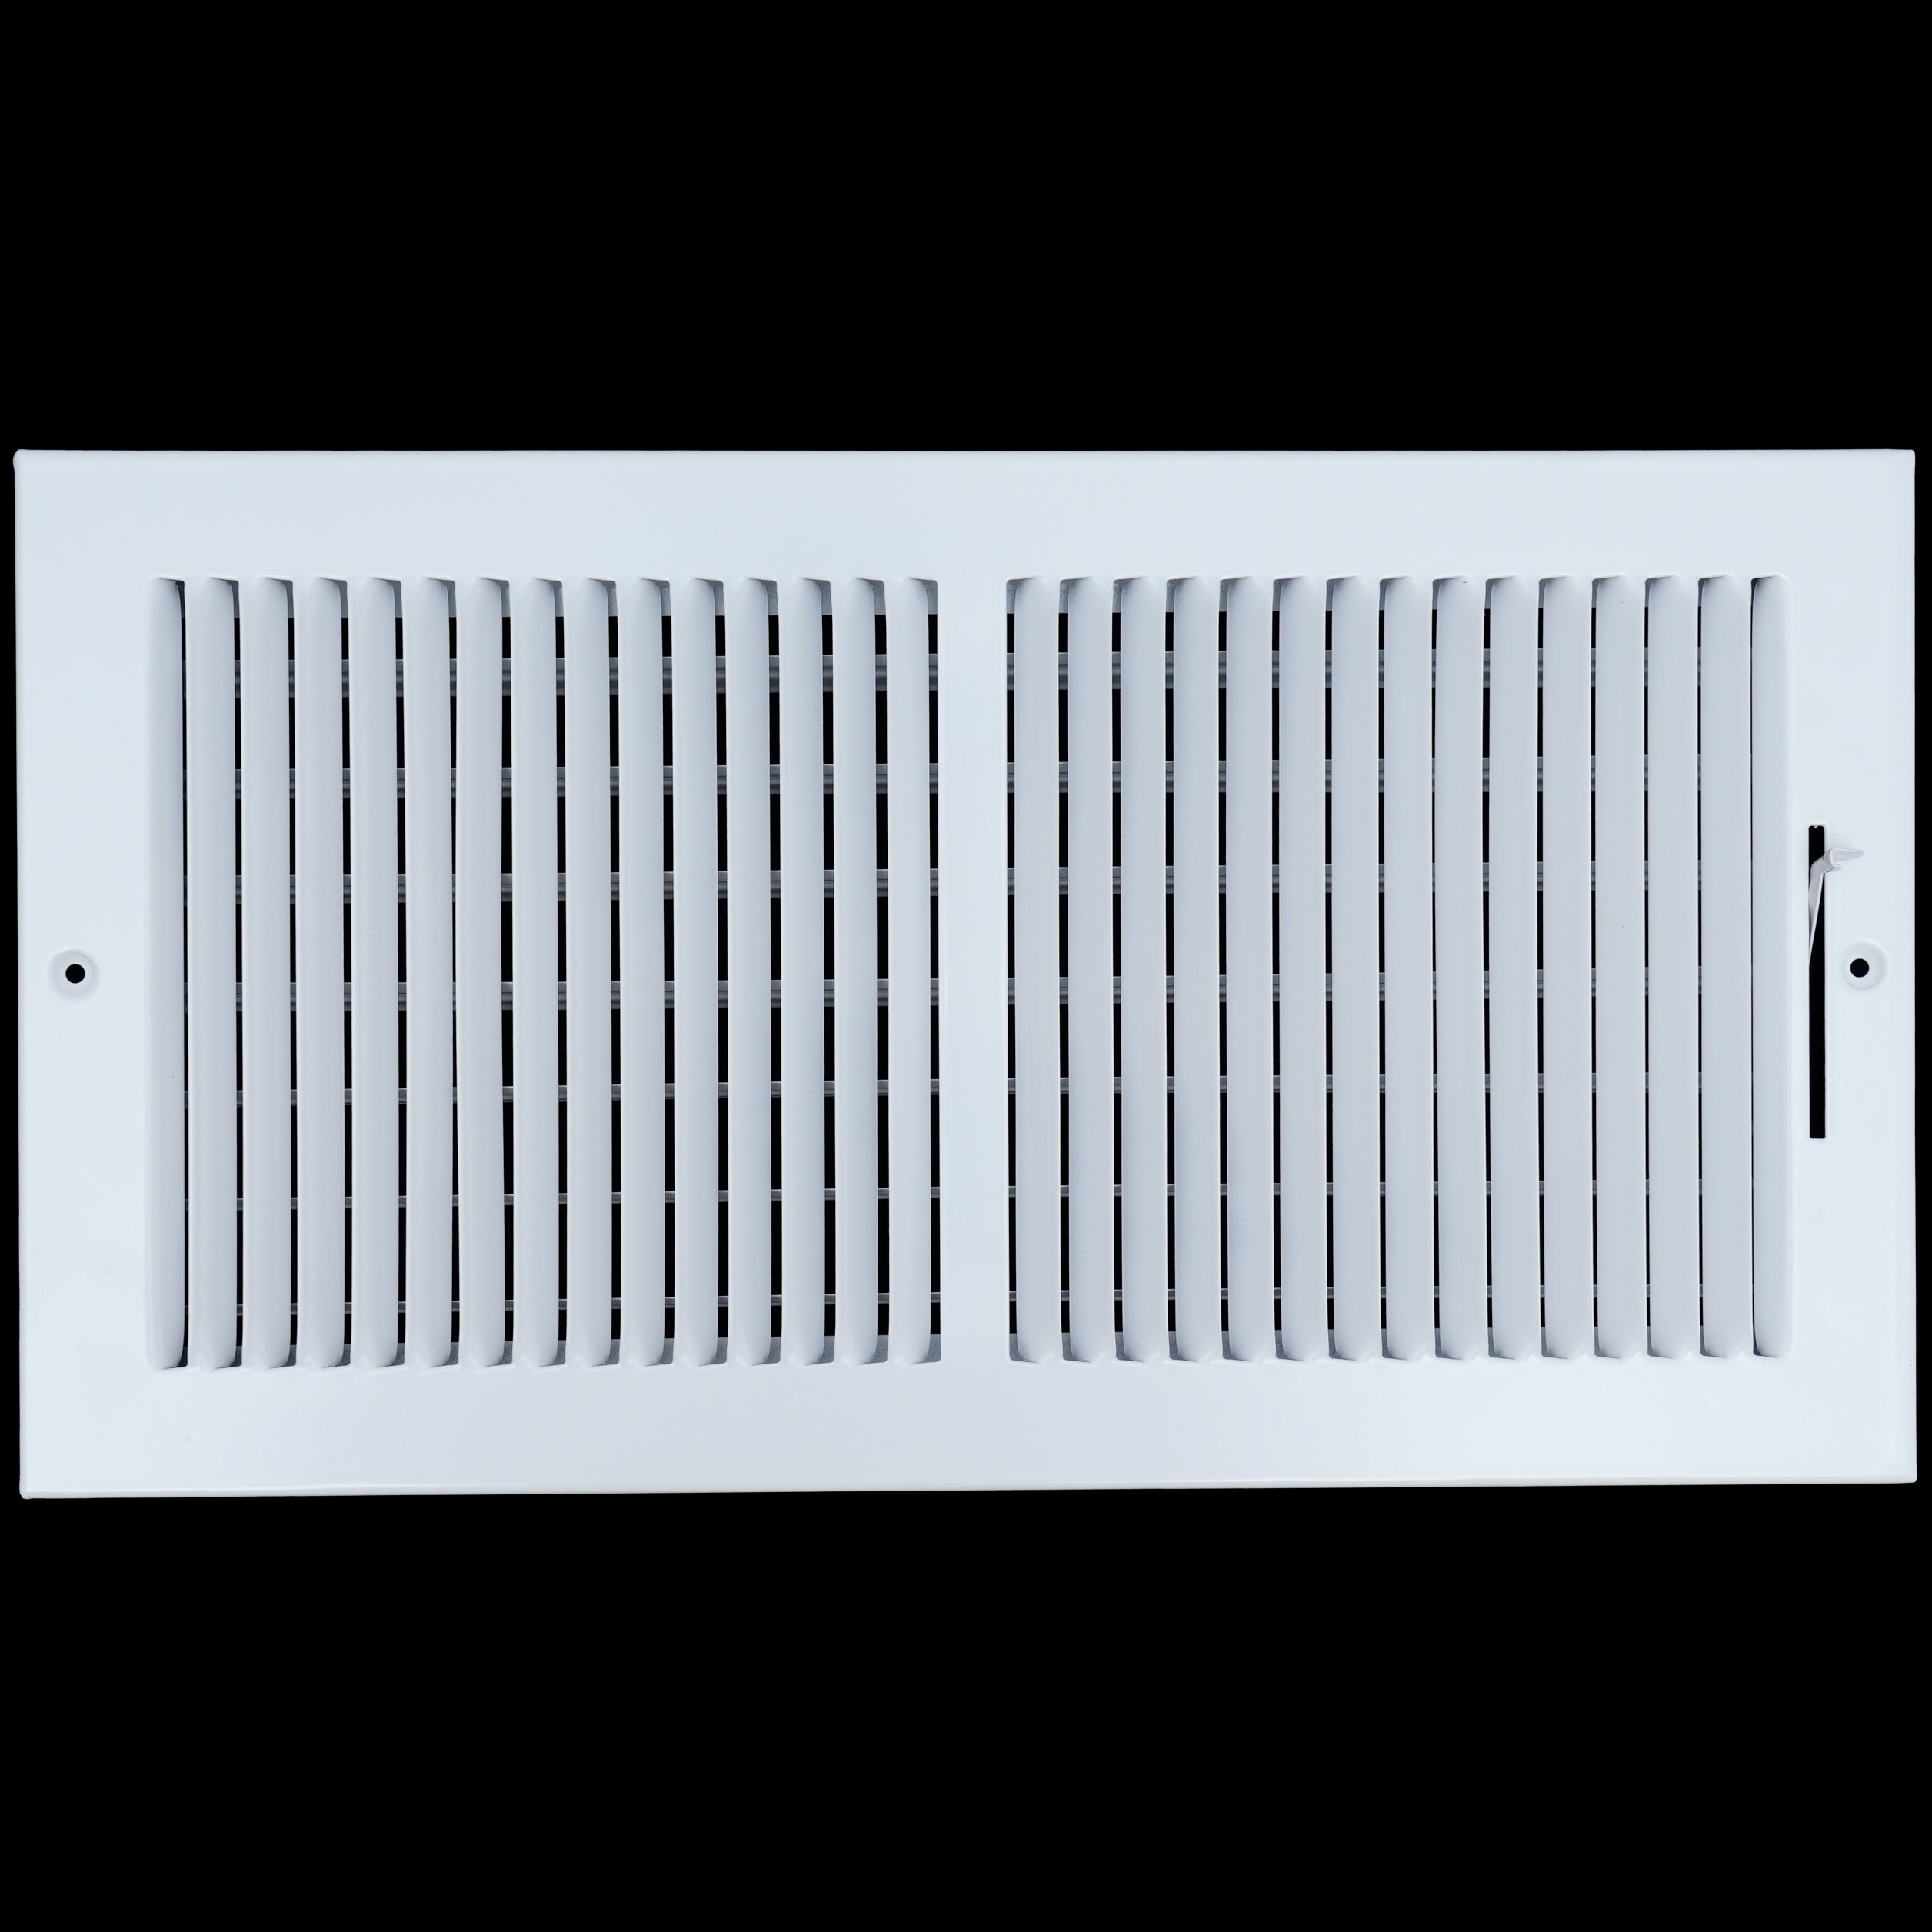 16 X 8 Duct Opening | 2 WAY Steel Air Supply Diffuser for Sidewall and Ceiling